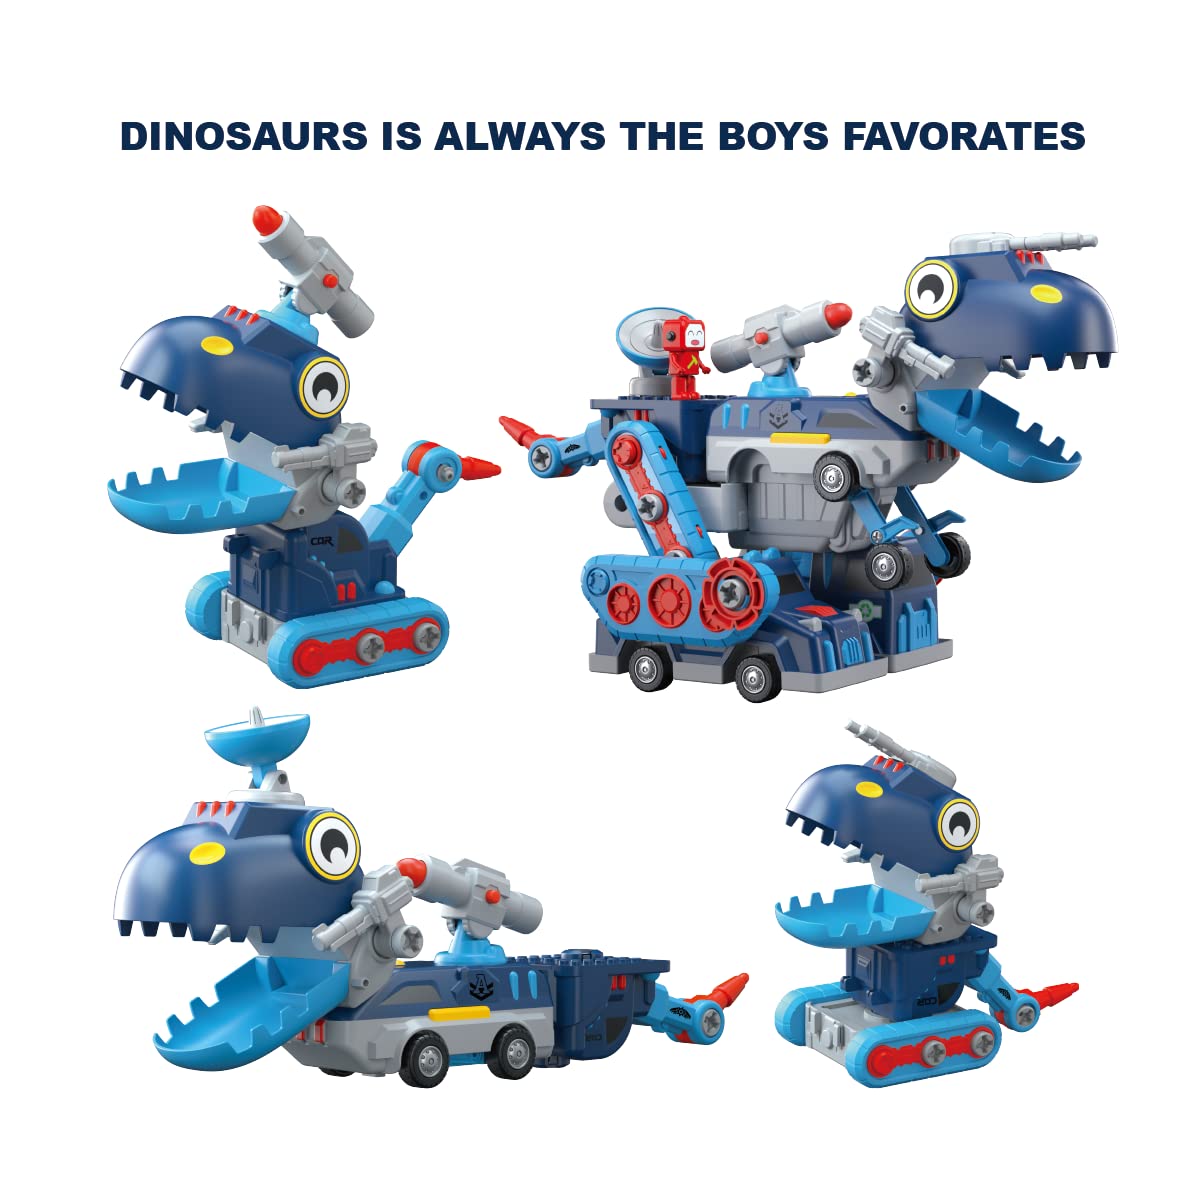 Toys for 5+ Year Old Boys, Take Apart Dinosaur, Magnetic Building Blocks Vehicles Play Set, 5 in 1 Cars & Trucks Transform Into Robot Dino T-rex, Engineering STEM Toys & Gifts for Boys & Girls